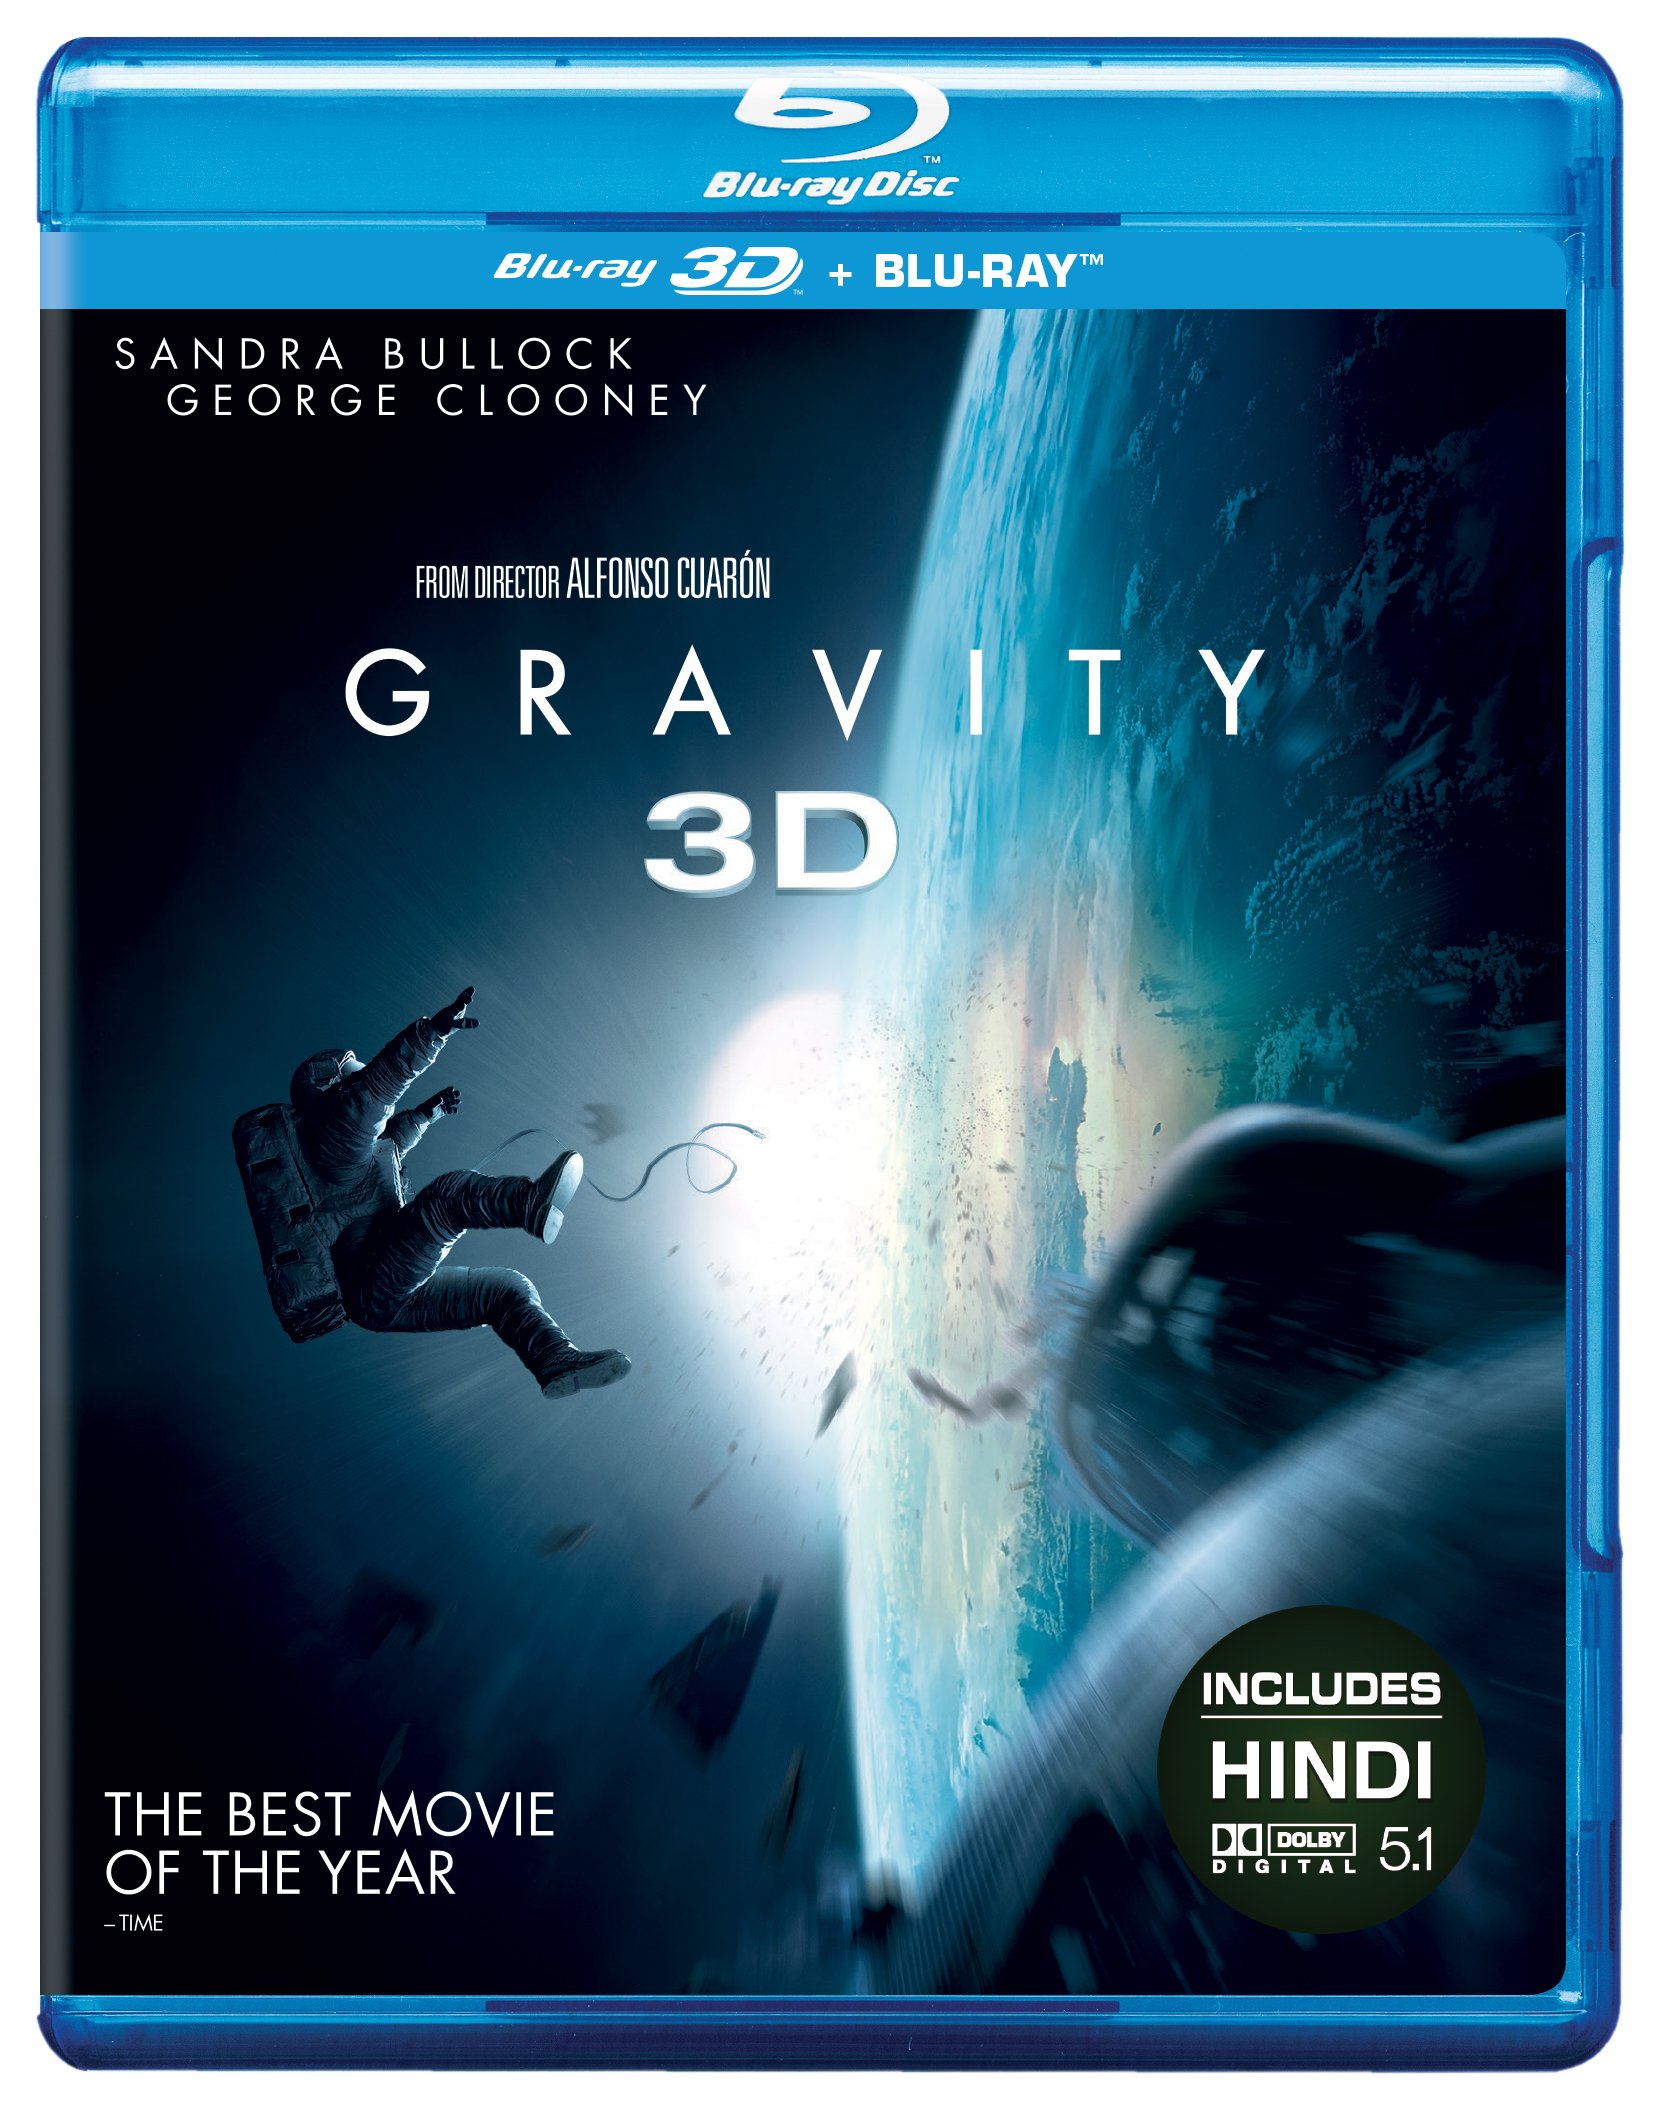 gravity-blu-ray-3d-blu-ray-2-disc-movie-purchase-or-watch-online